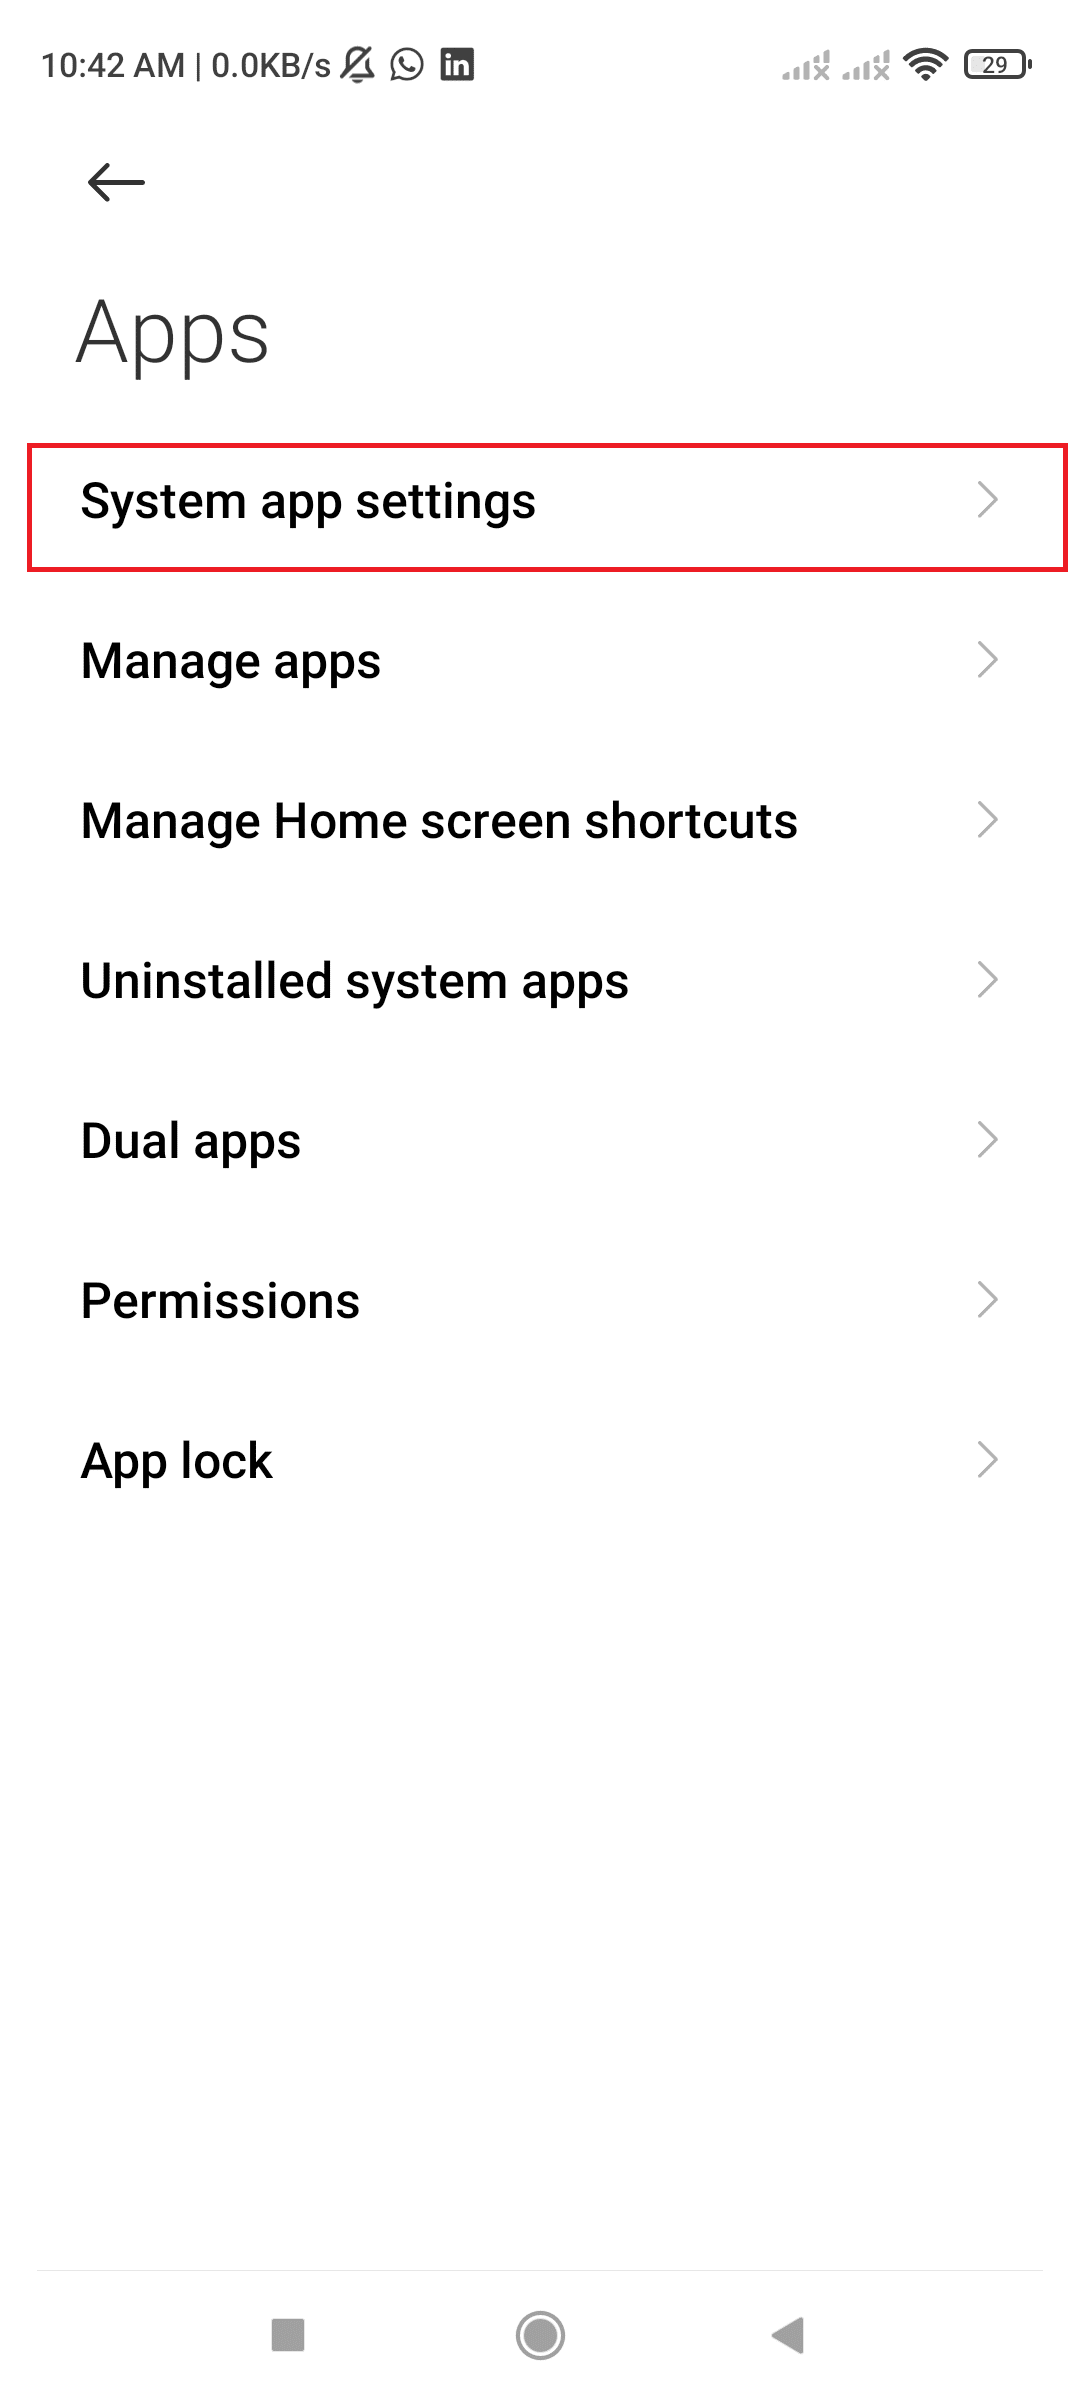 System app nqis